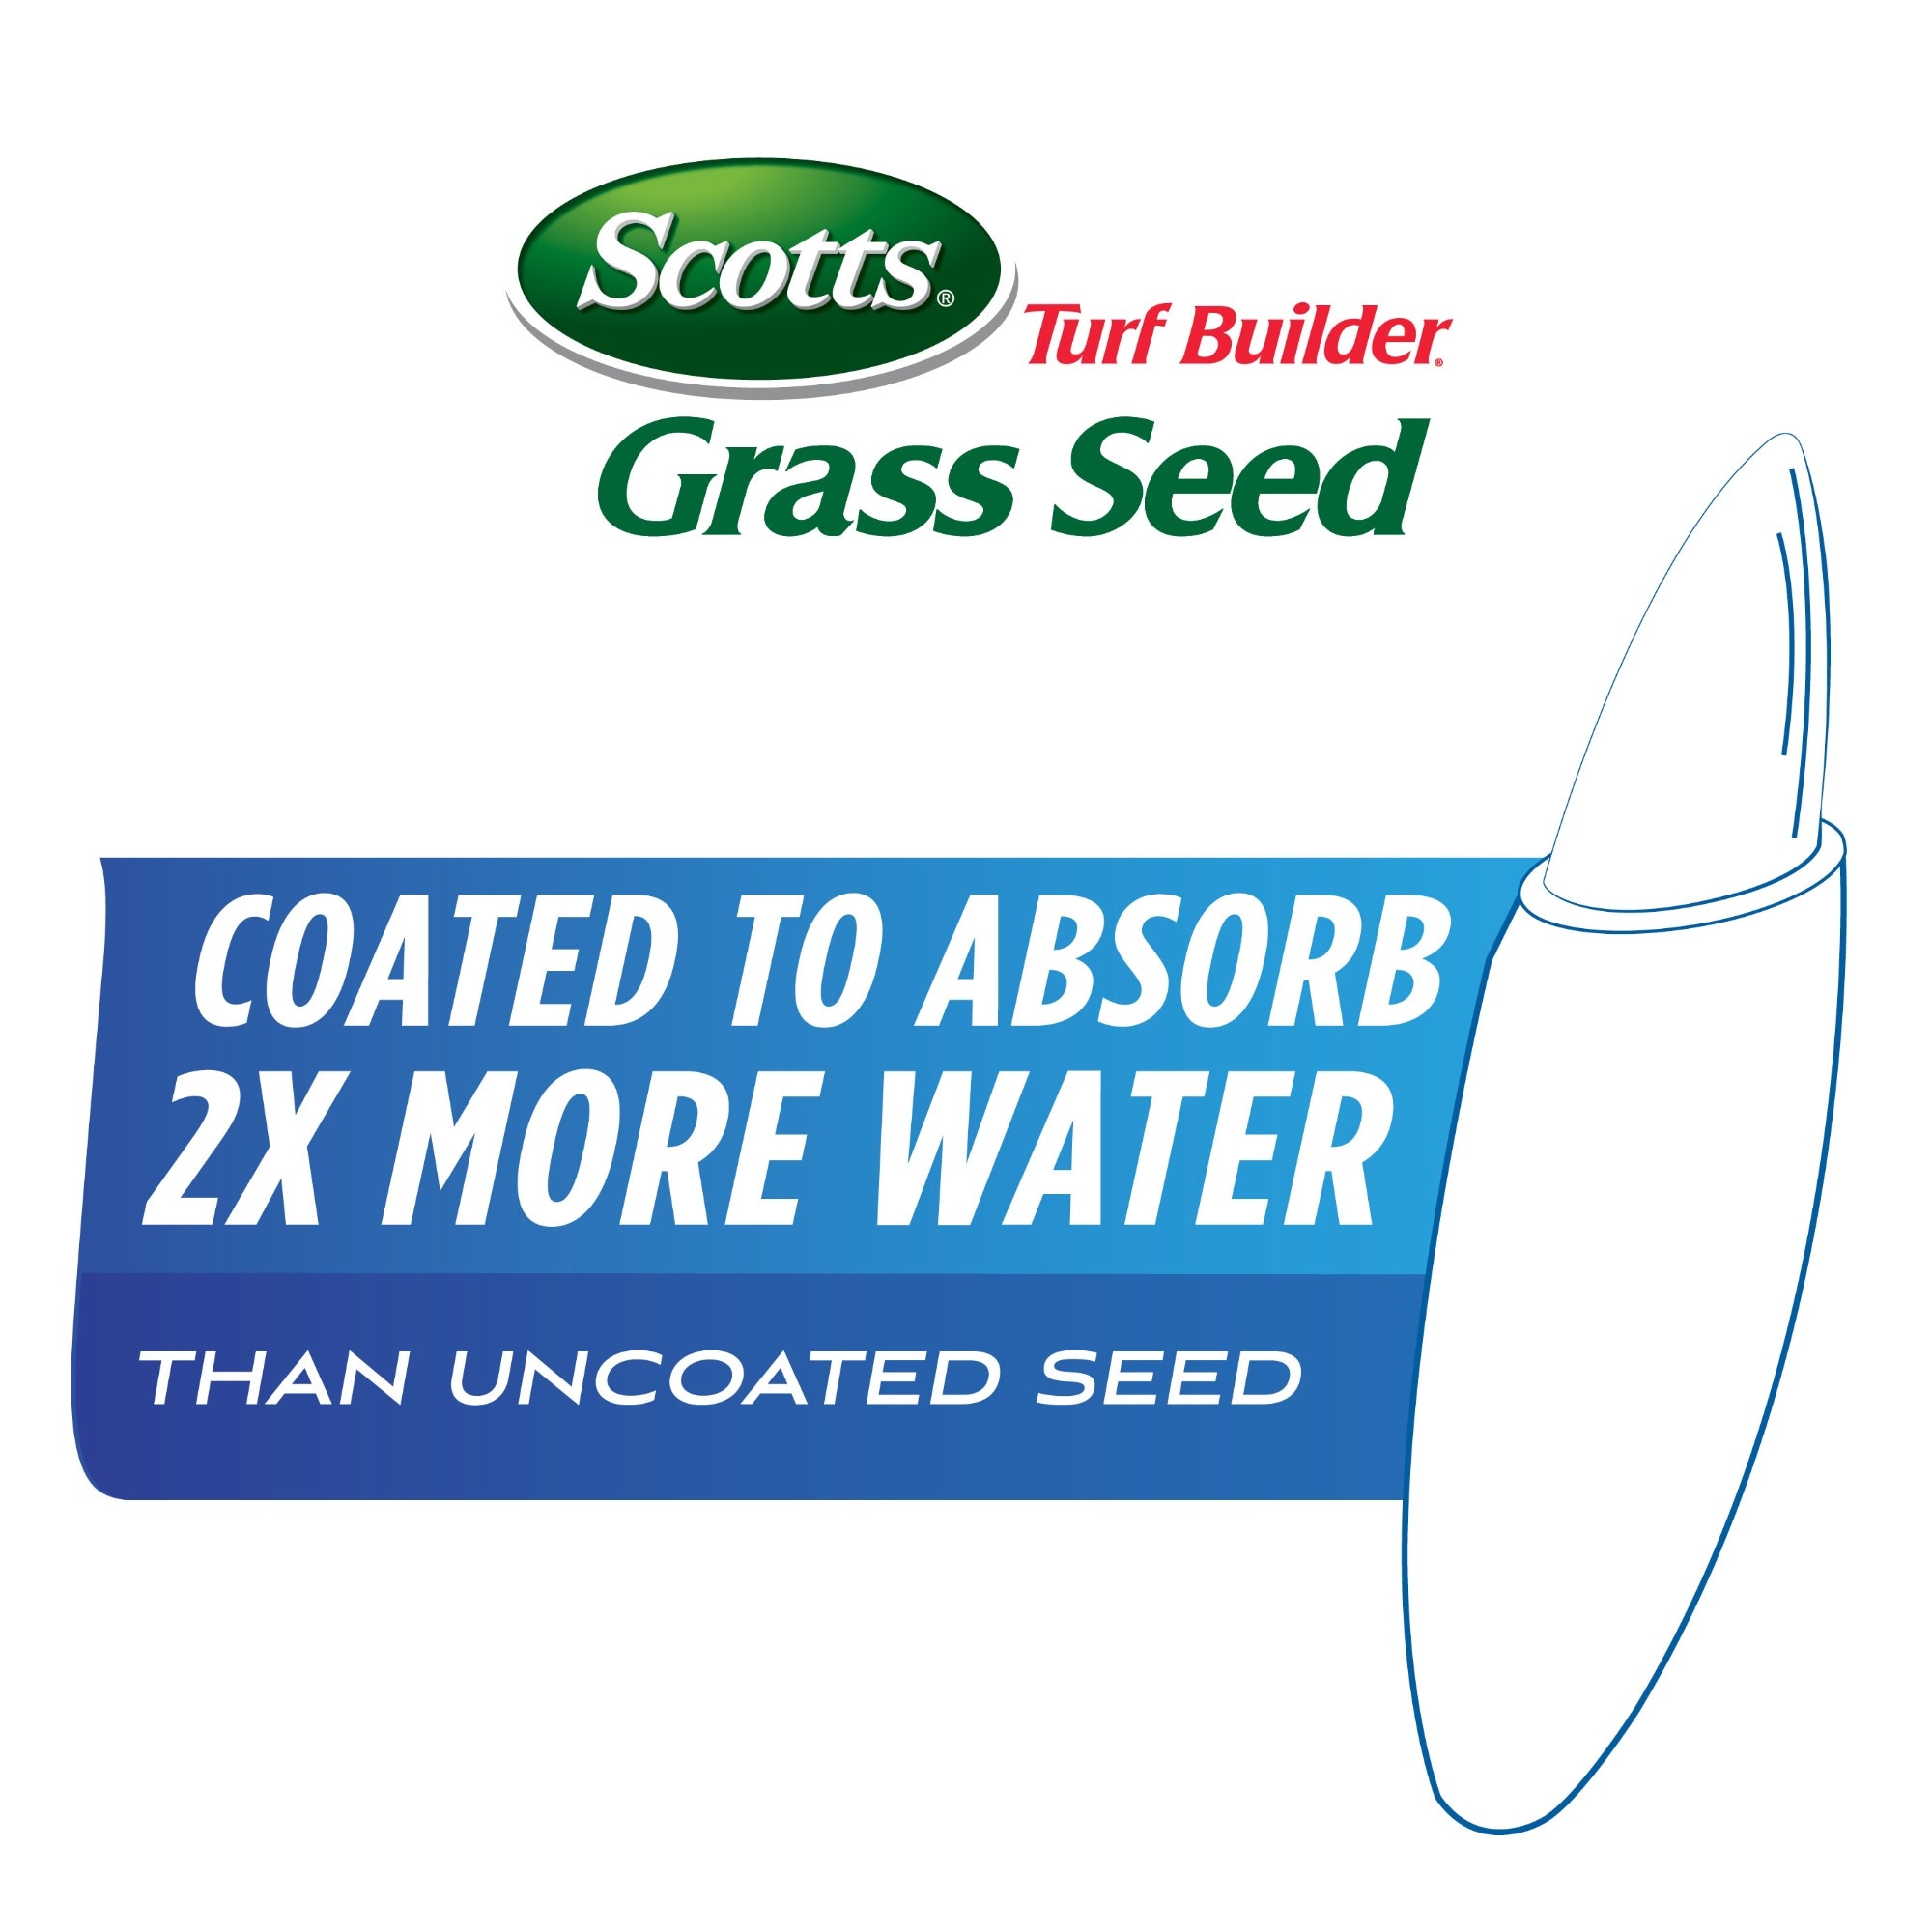 Scotts Turf Builder Argentine 10-lb Bahia Grass Seed in the Grass Seed ...